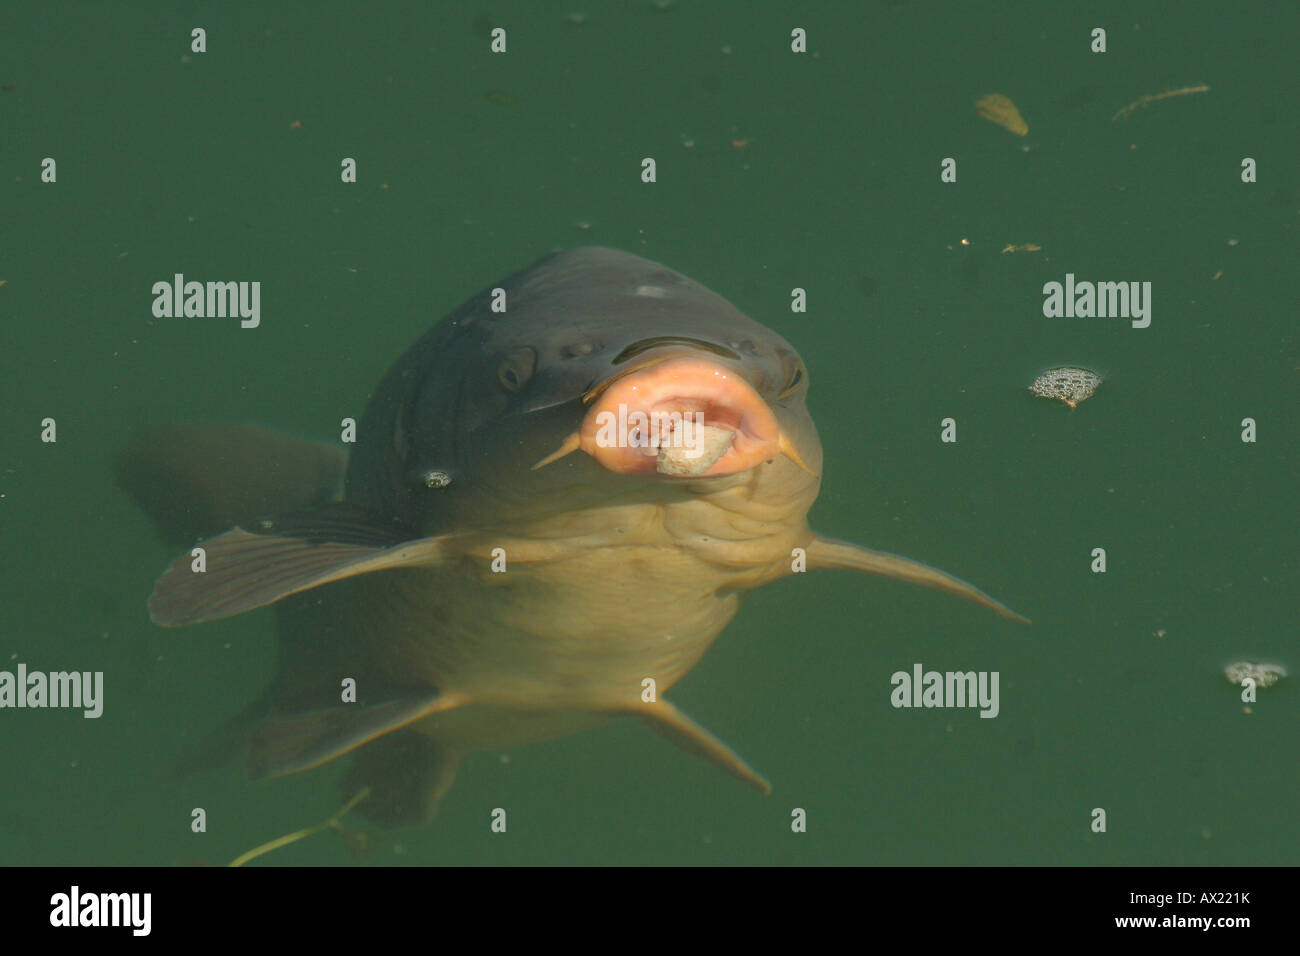 Common Carp (Cyprinus carpio) eating bread pieces at water's surface Stock Photo